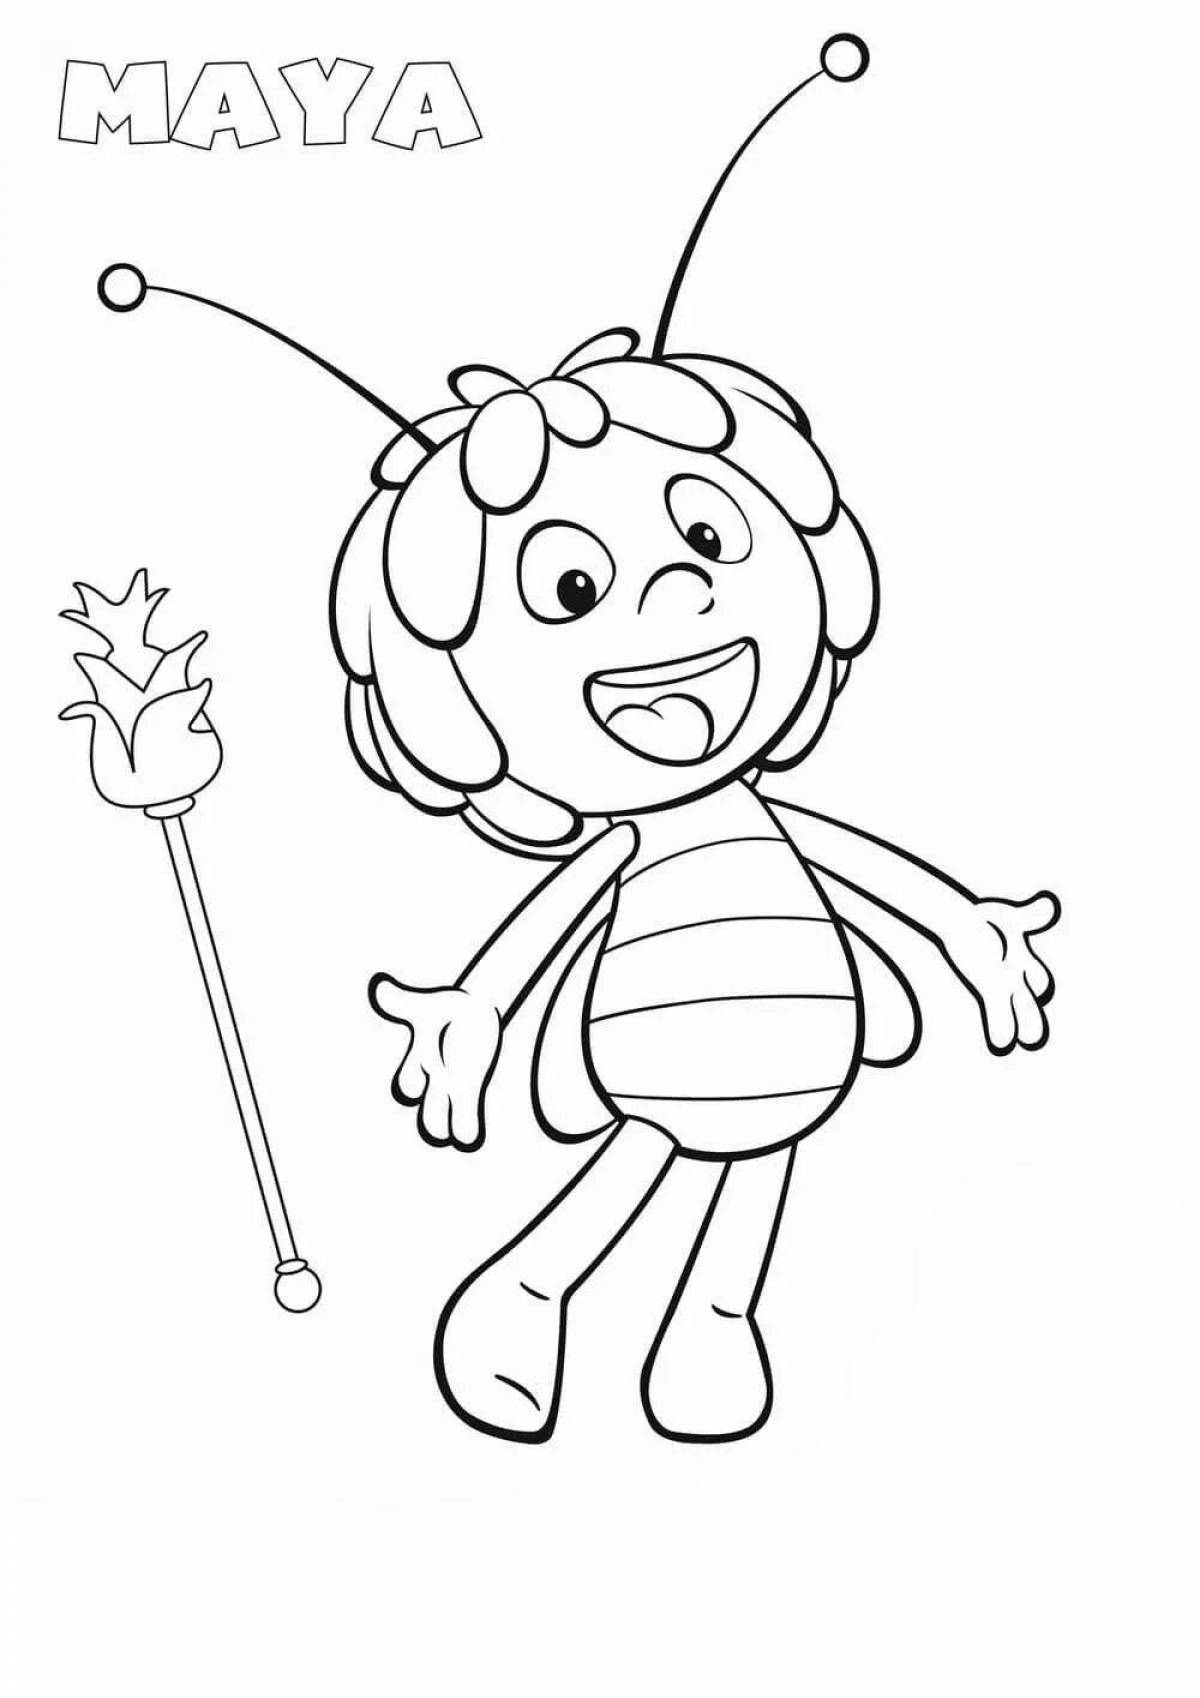 Maya bee coloring page for kids